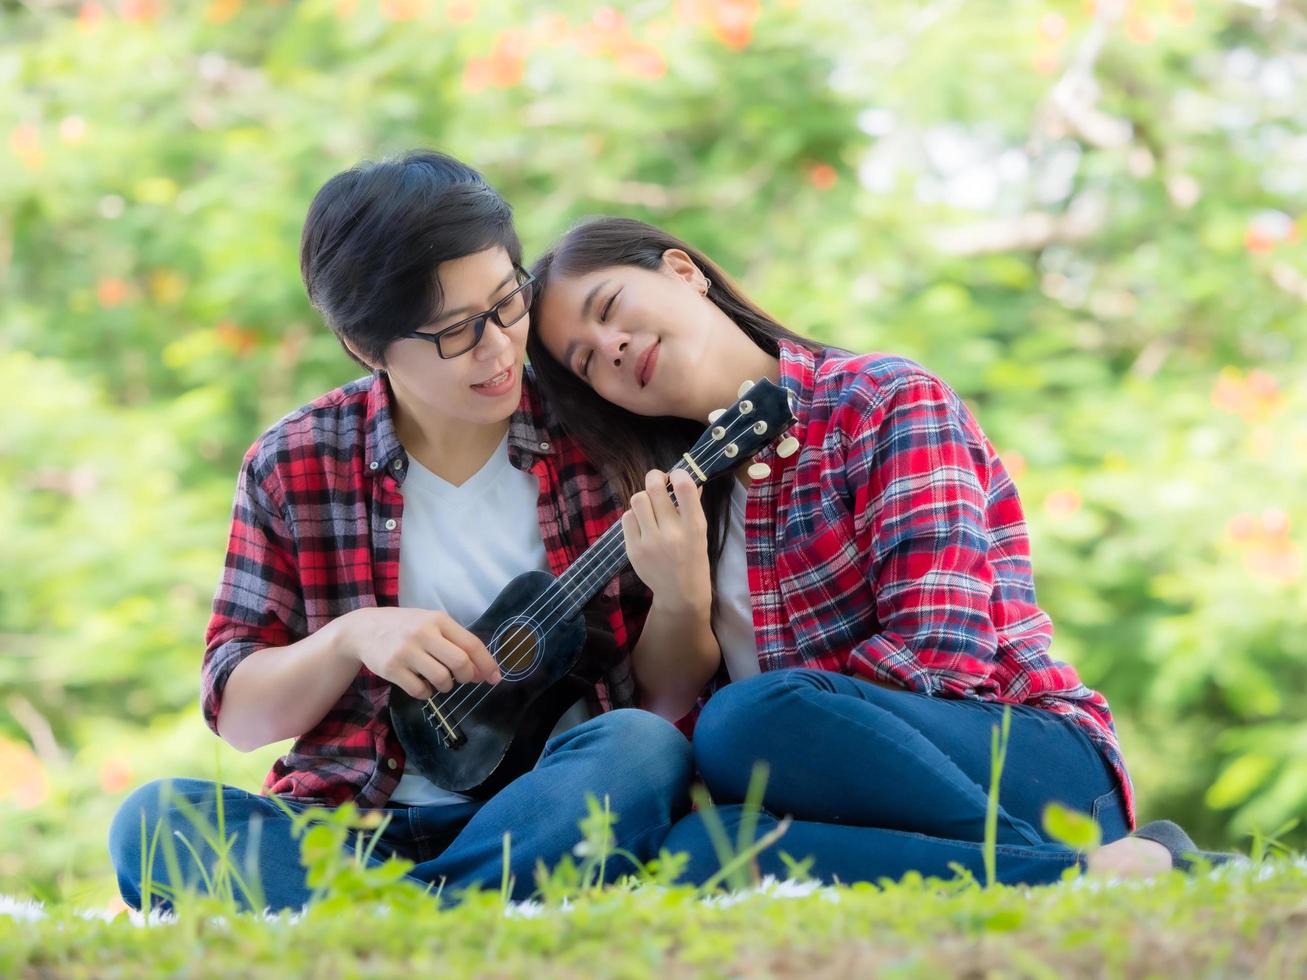 Asian female couples LGBT sitting and playing ukulele in the garden and embrace each other in love and happiness photo